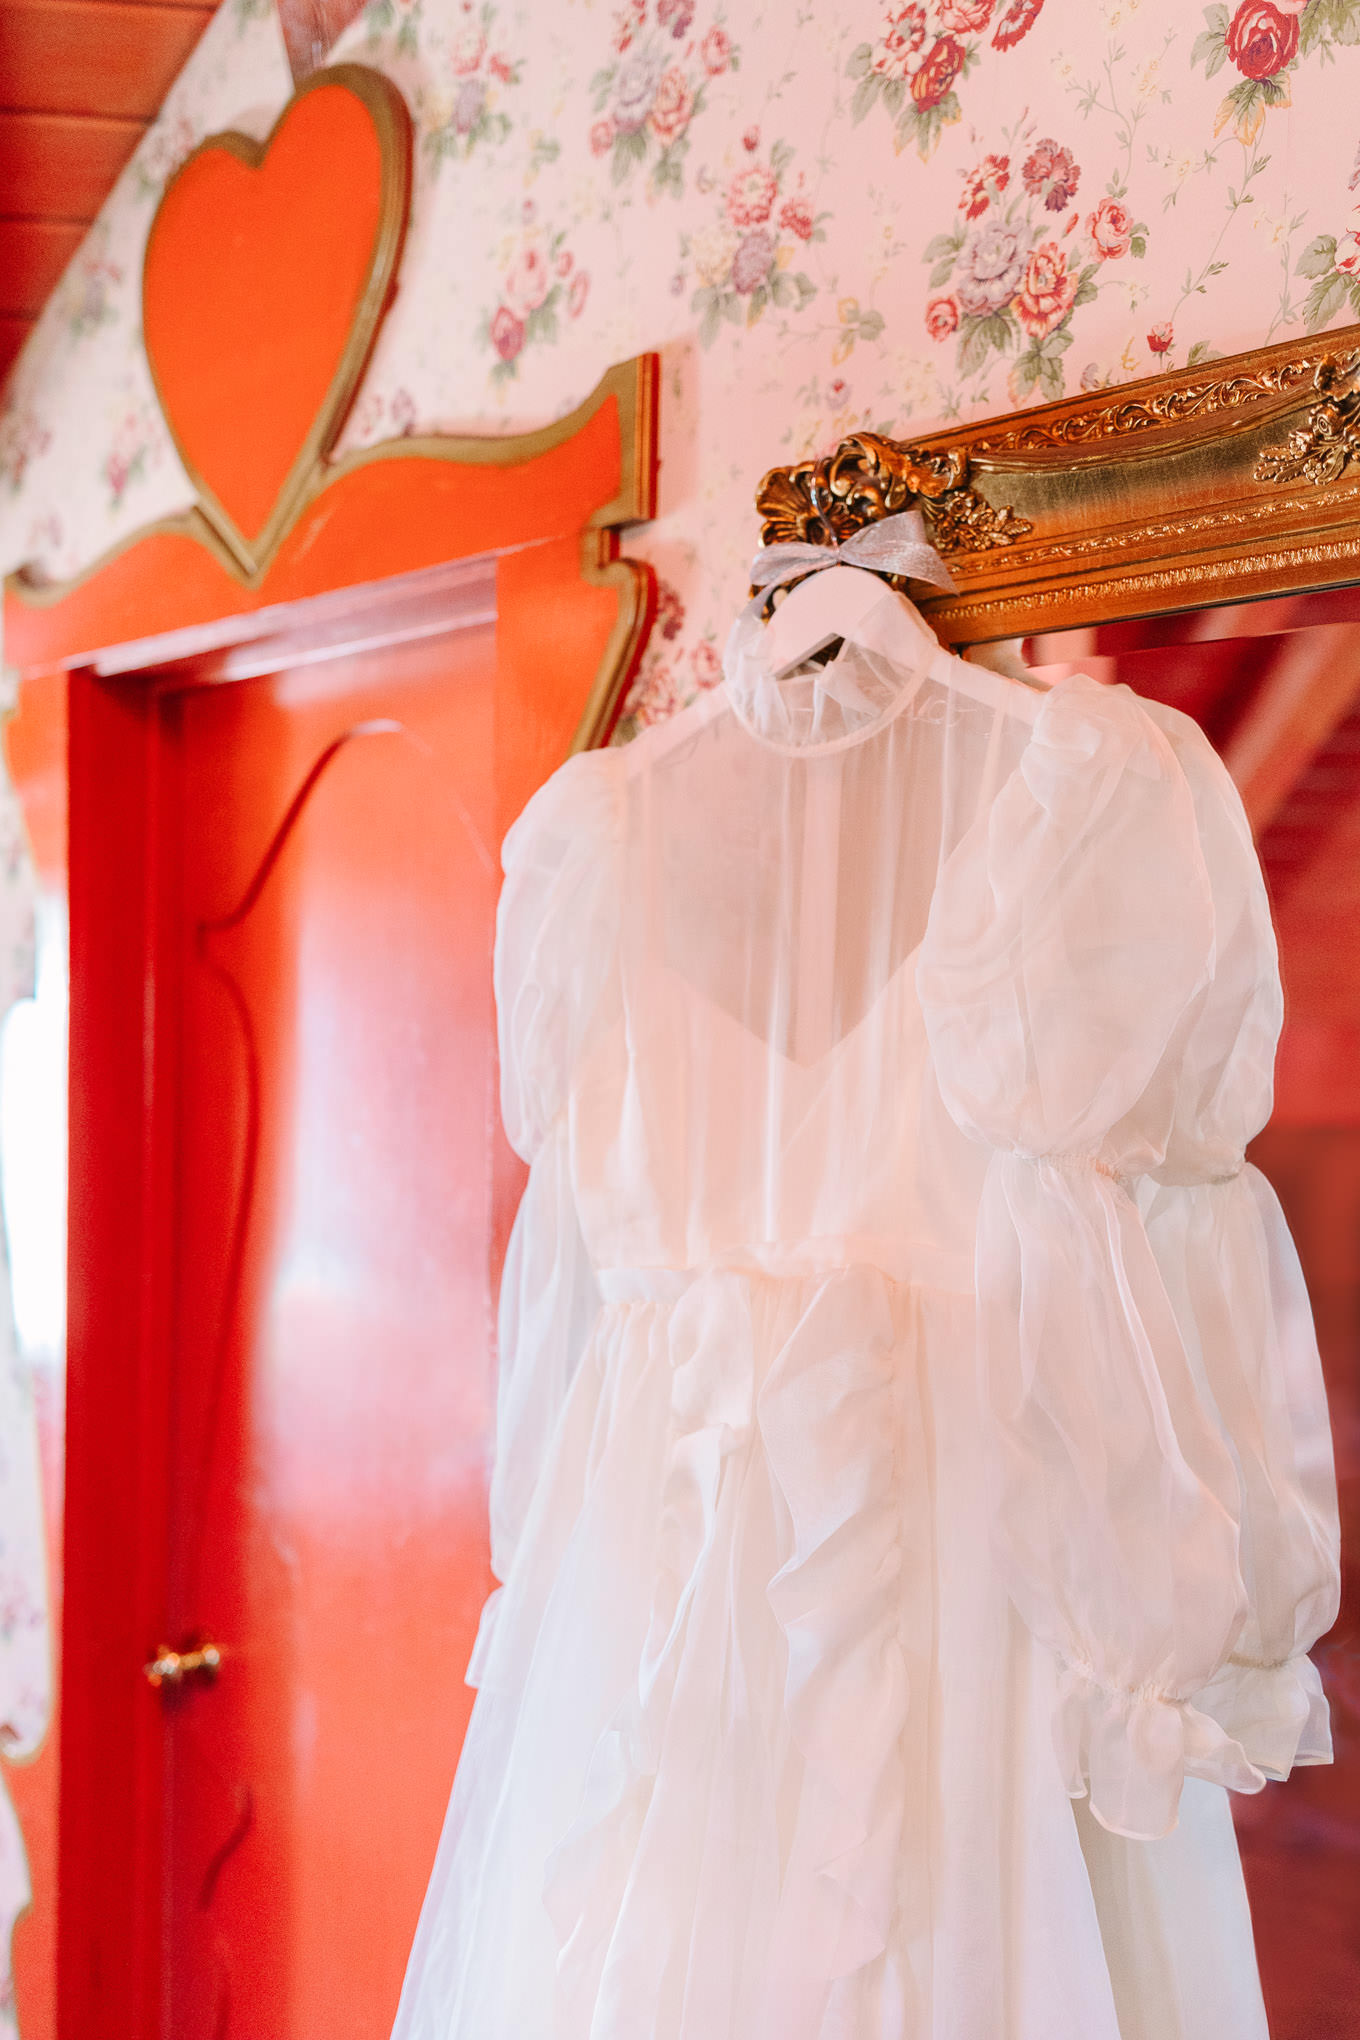 Odylyne The Ceremony gown hanging in Madonna Inn | Colorful and quirky wedding at Higuera Ranch in San Luis Obispo | #sanluisobispowedding #californiawedding #higueraranch #madonnainn   
Source: Mary Costa Photography | Los Angeles 